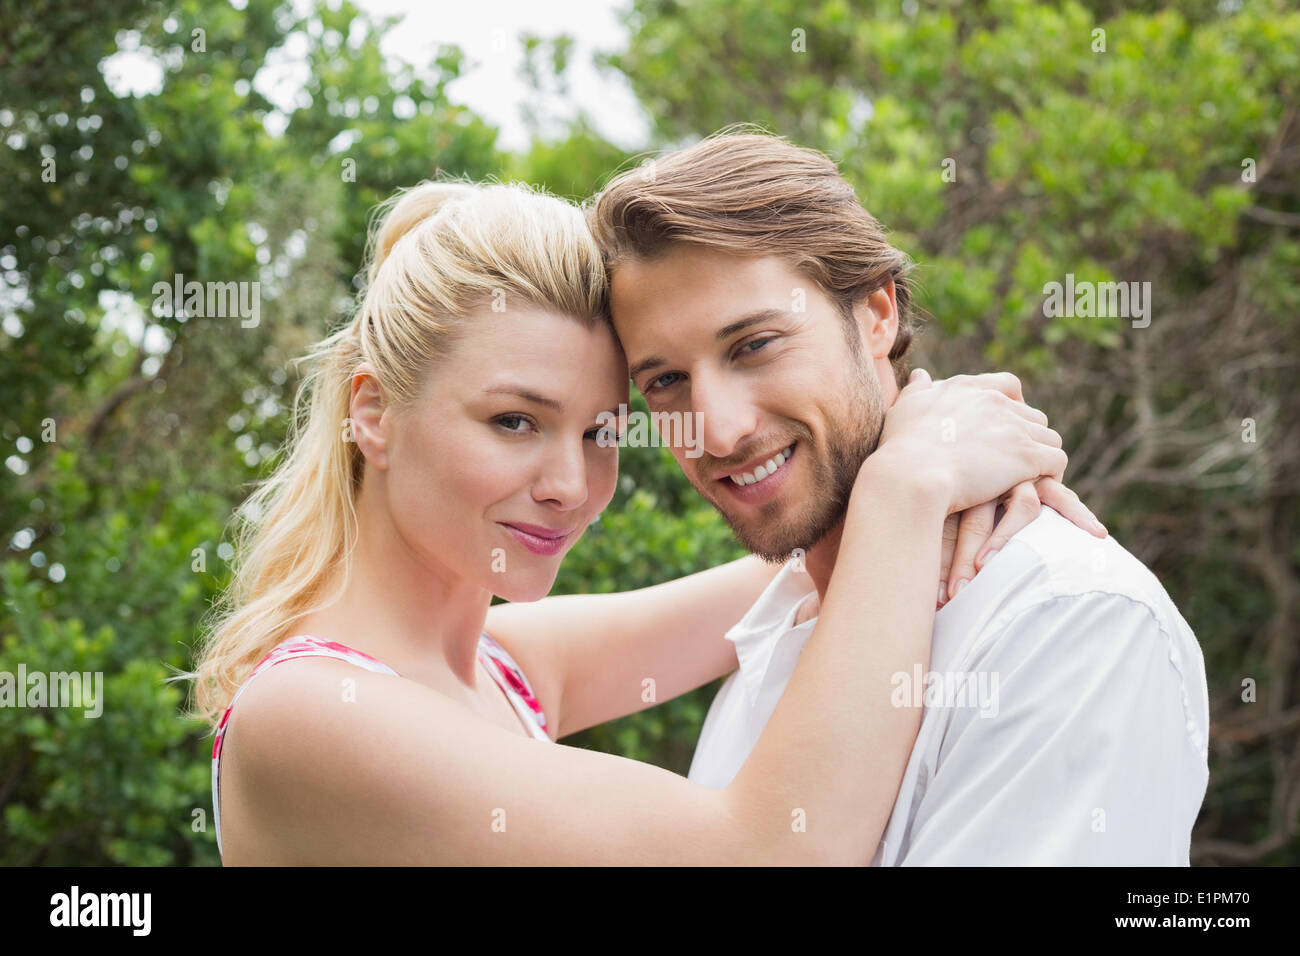 Cute couple standing outside hugging smiling at camera Stock Photo